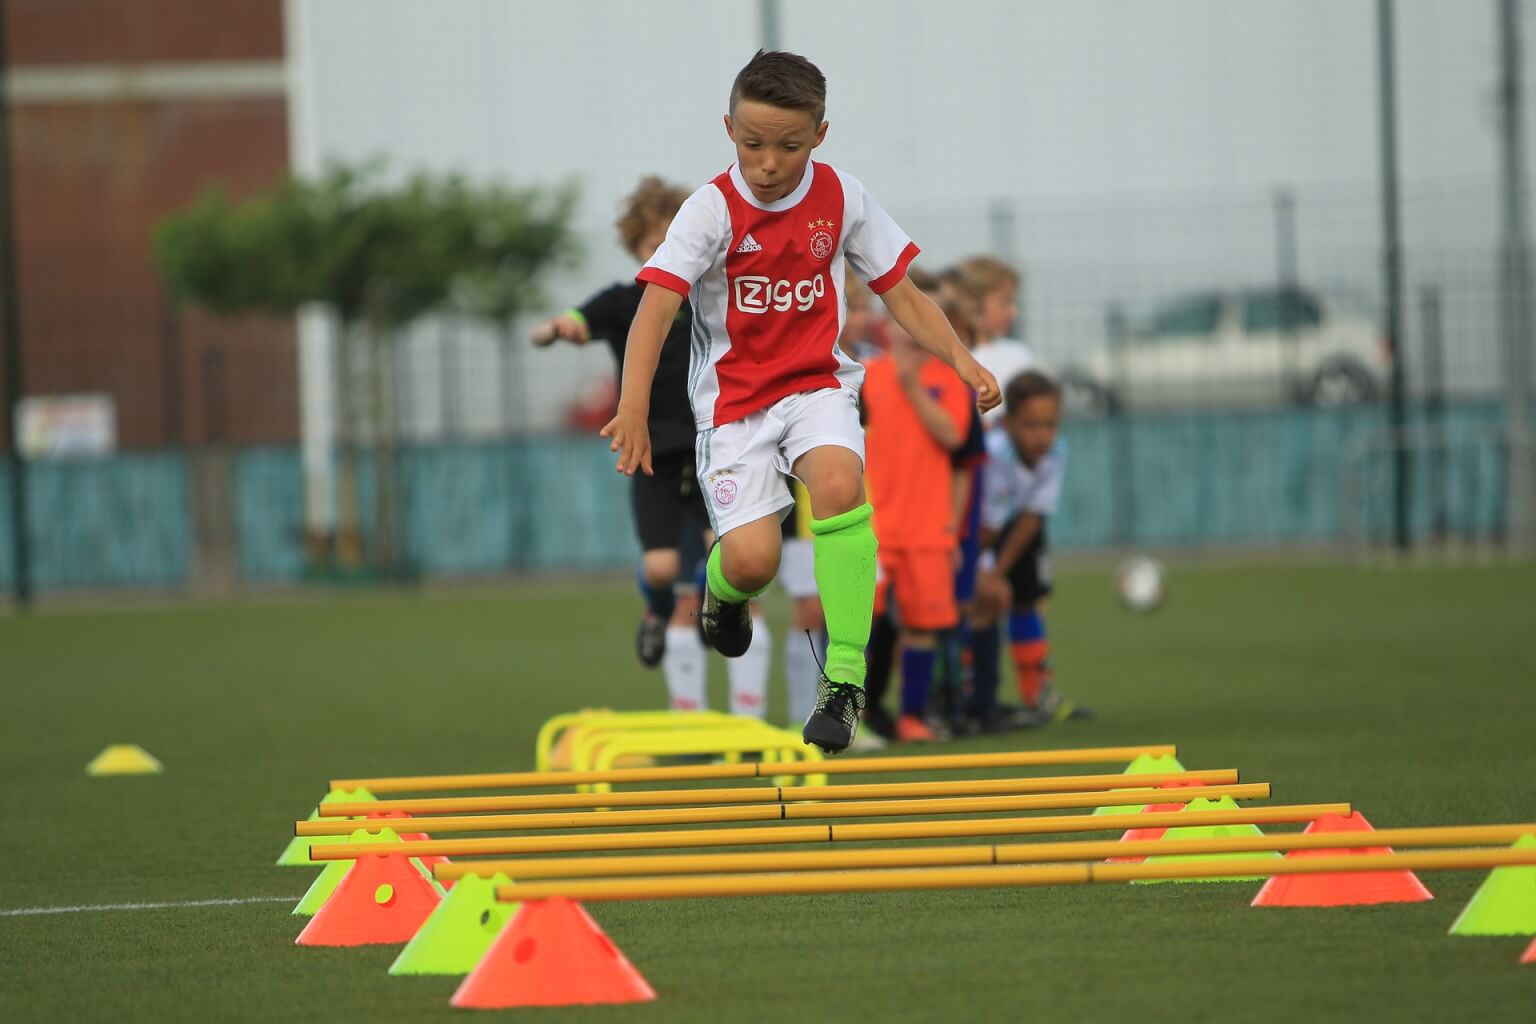 How to Start A Soccer Academy 11 Tips for Success